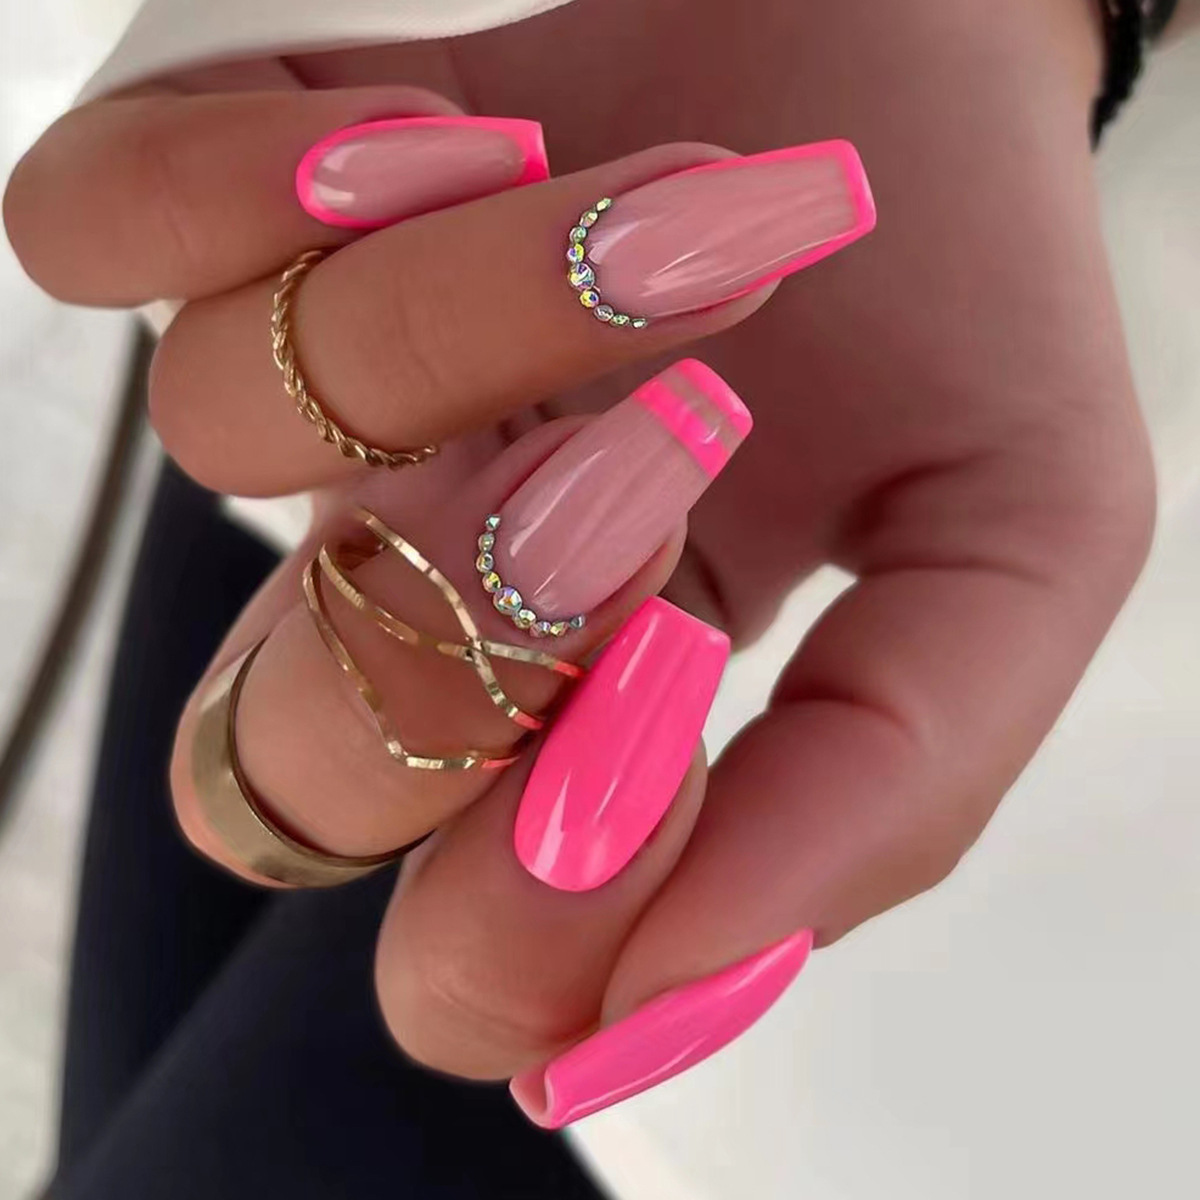 Dazzling Crystals for Striking Nails